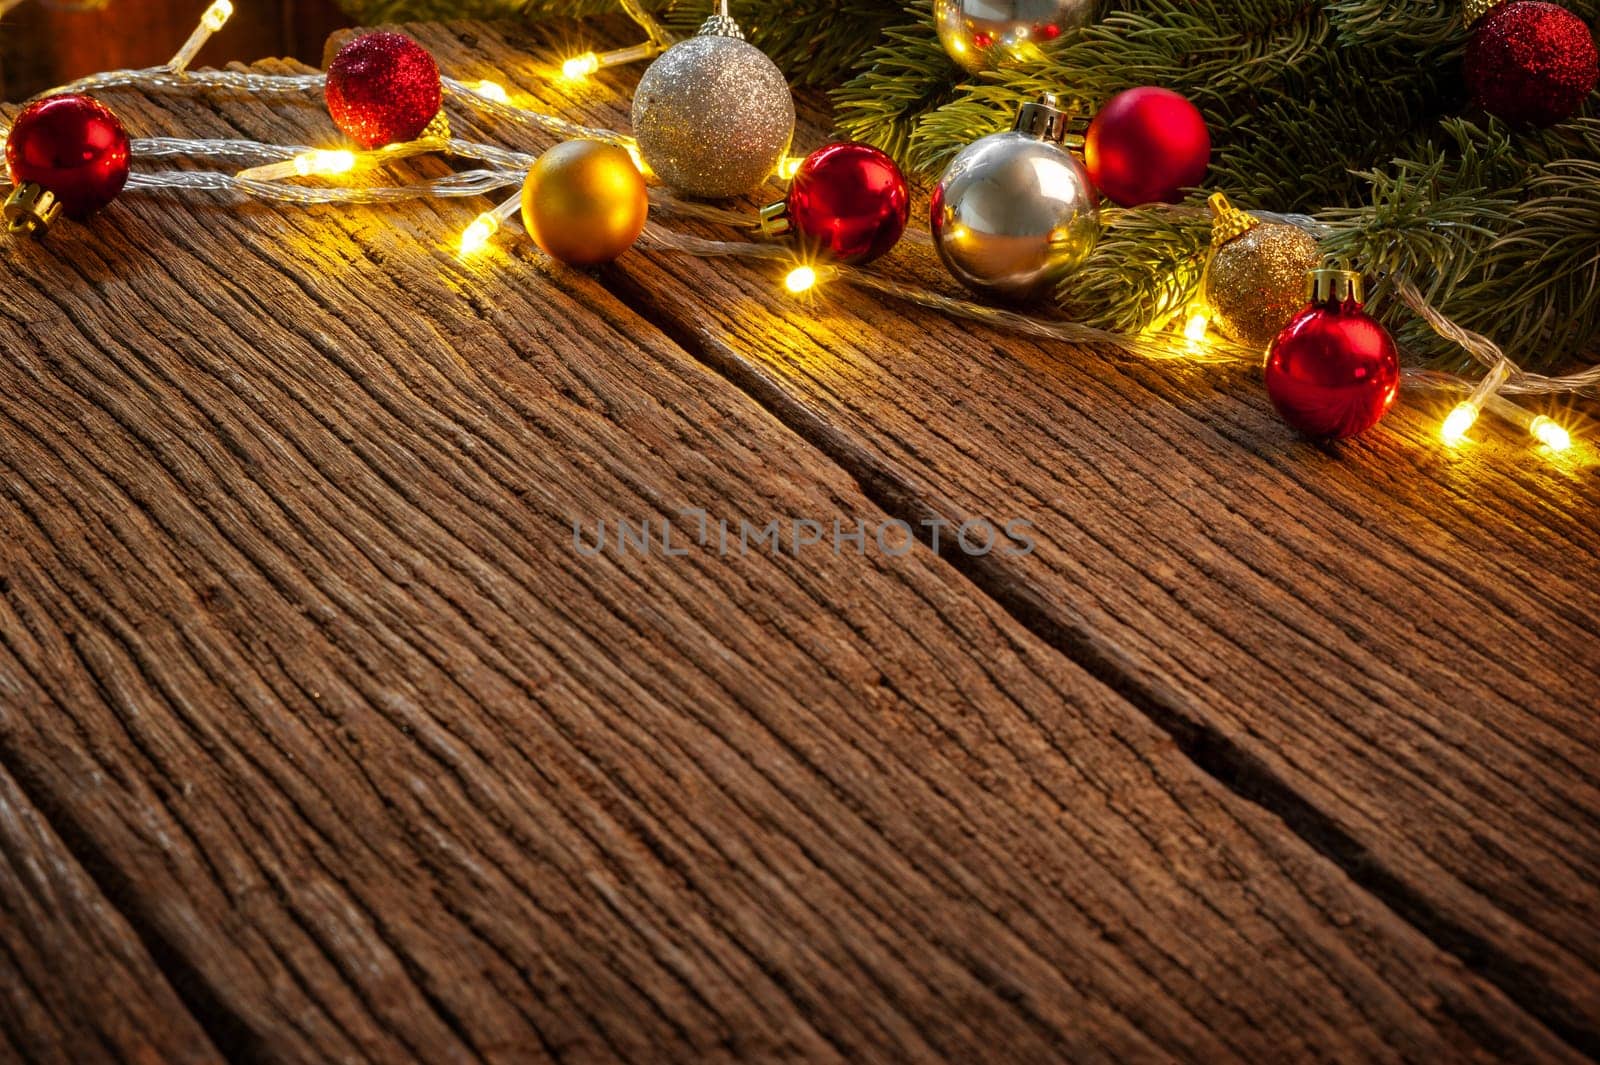 wooden table with fir tree and decorations. Christmas and New Year concept